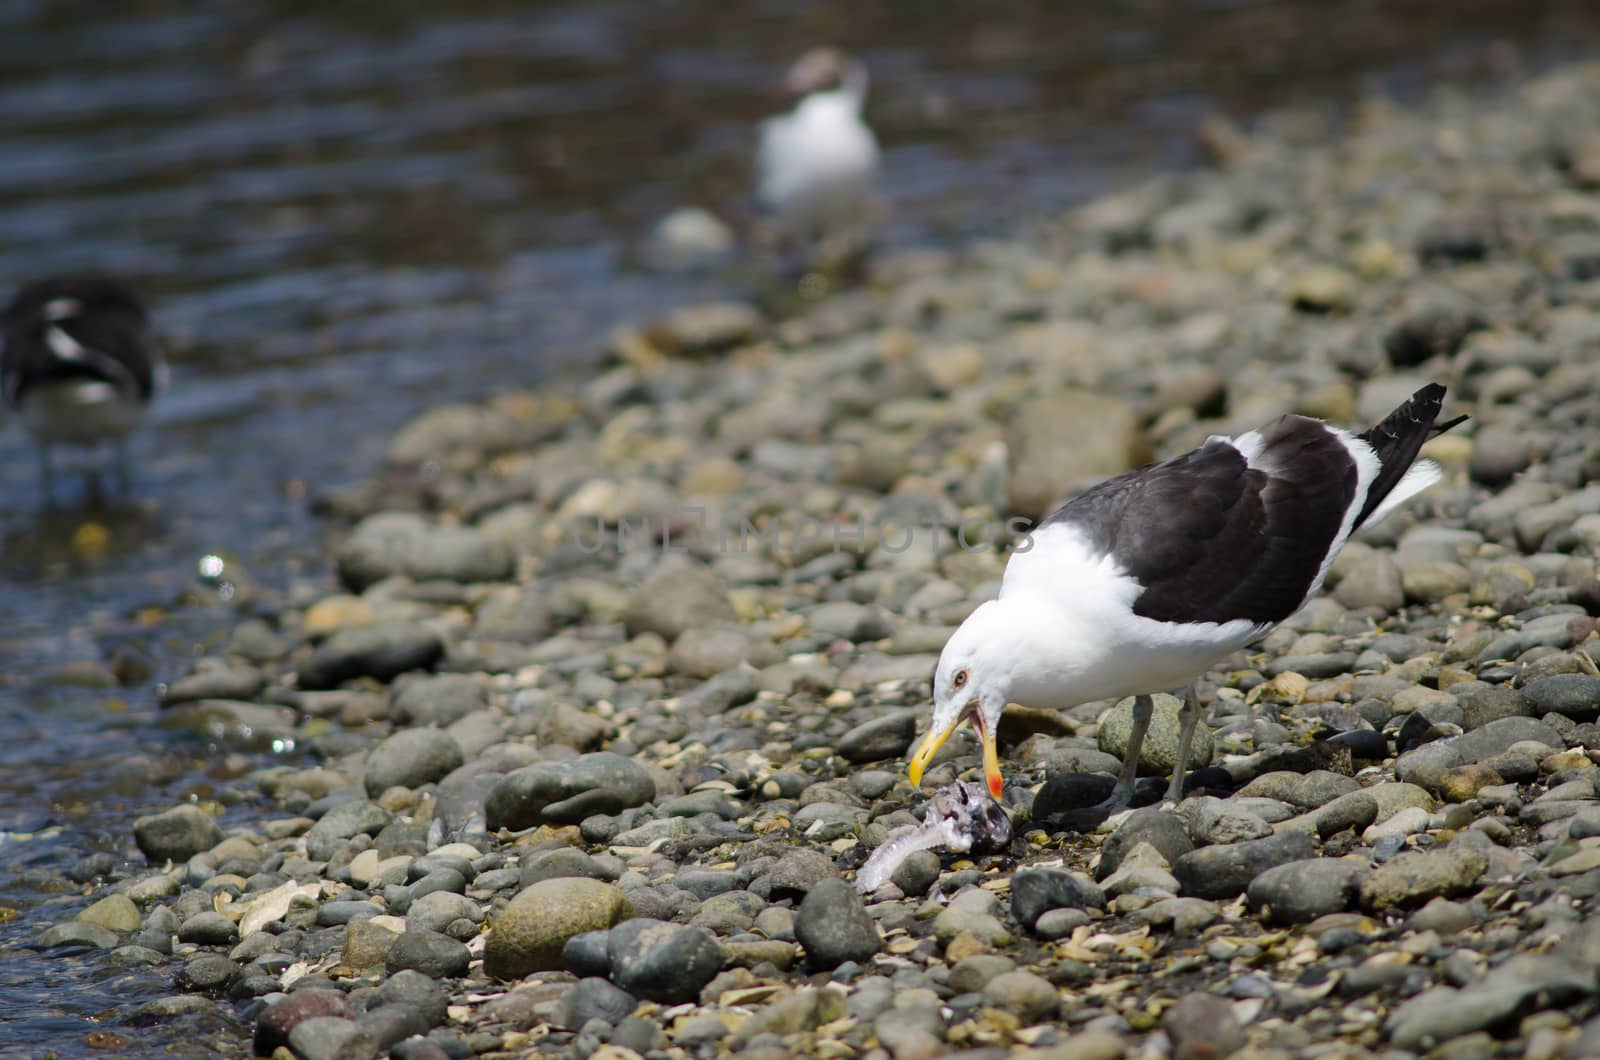 Kelp gull Larus dominicanus eating the remains of a fish. Angelmo. Puerto Montt. Los Lagos Region. Chile.